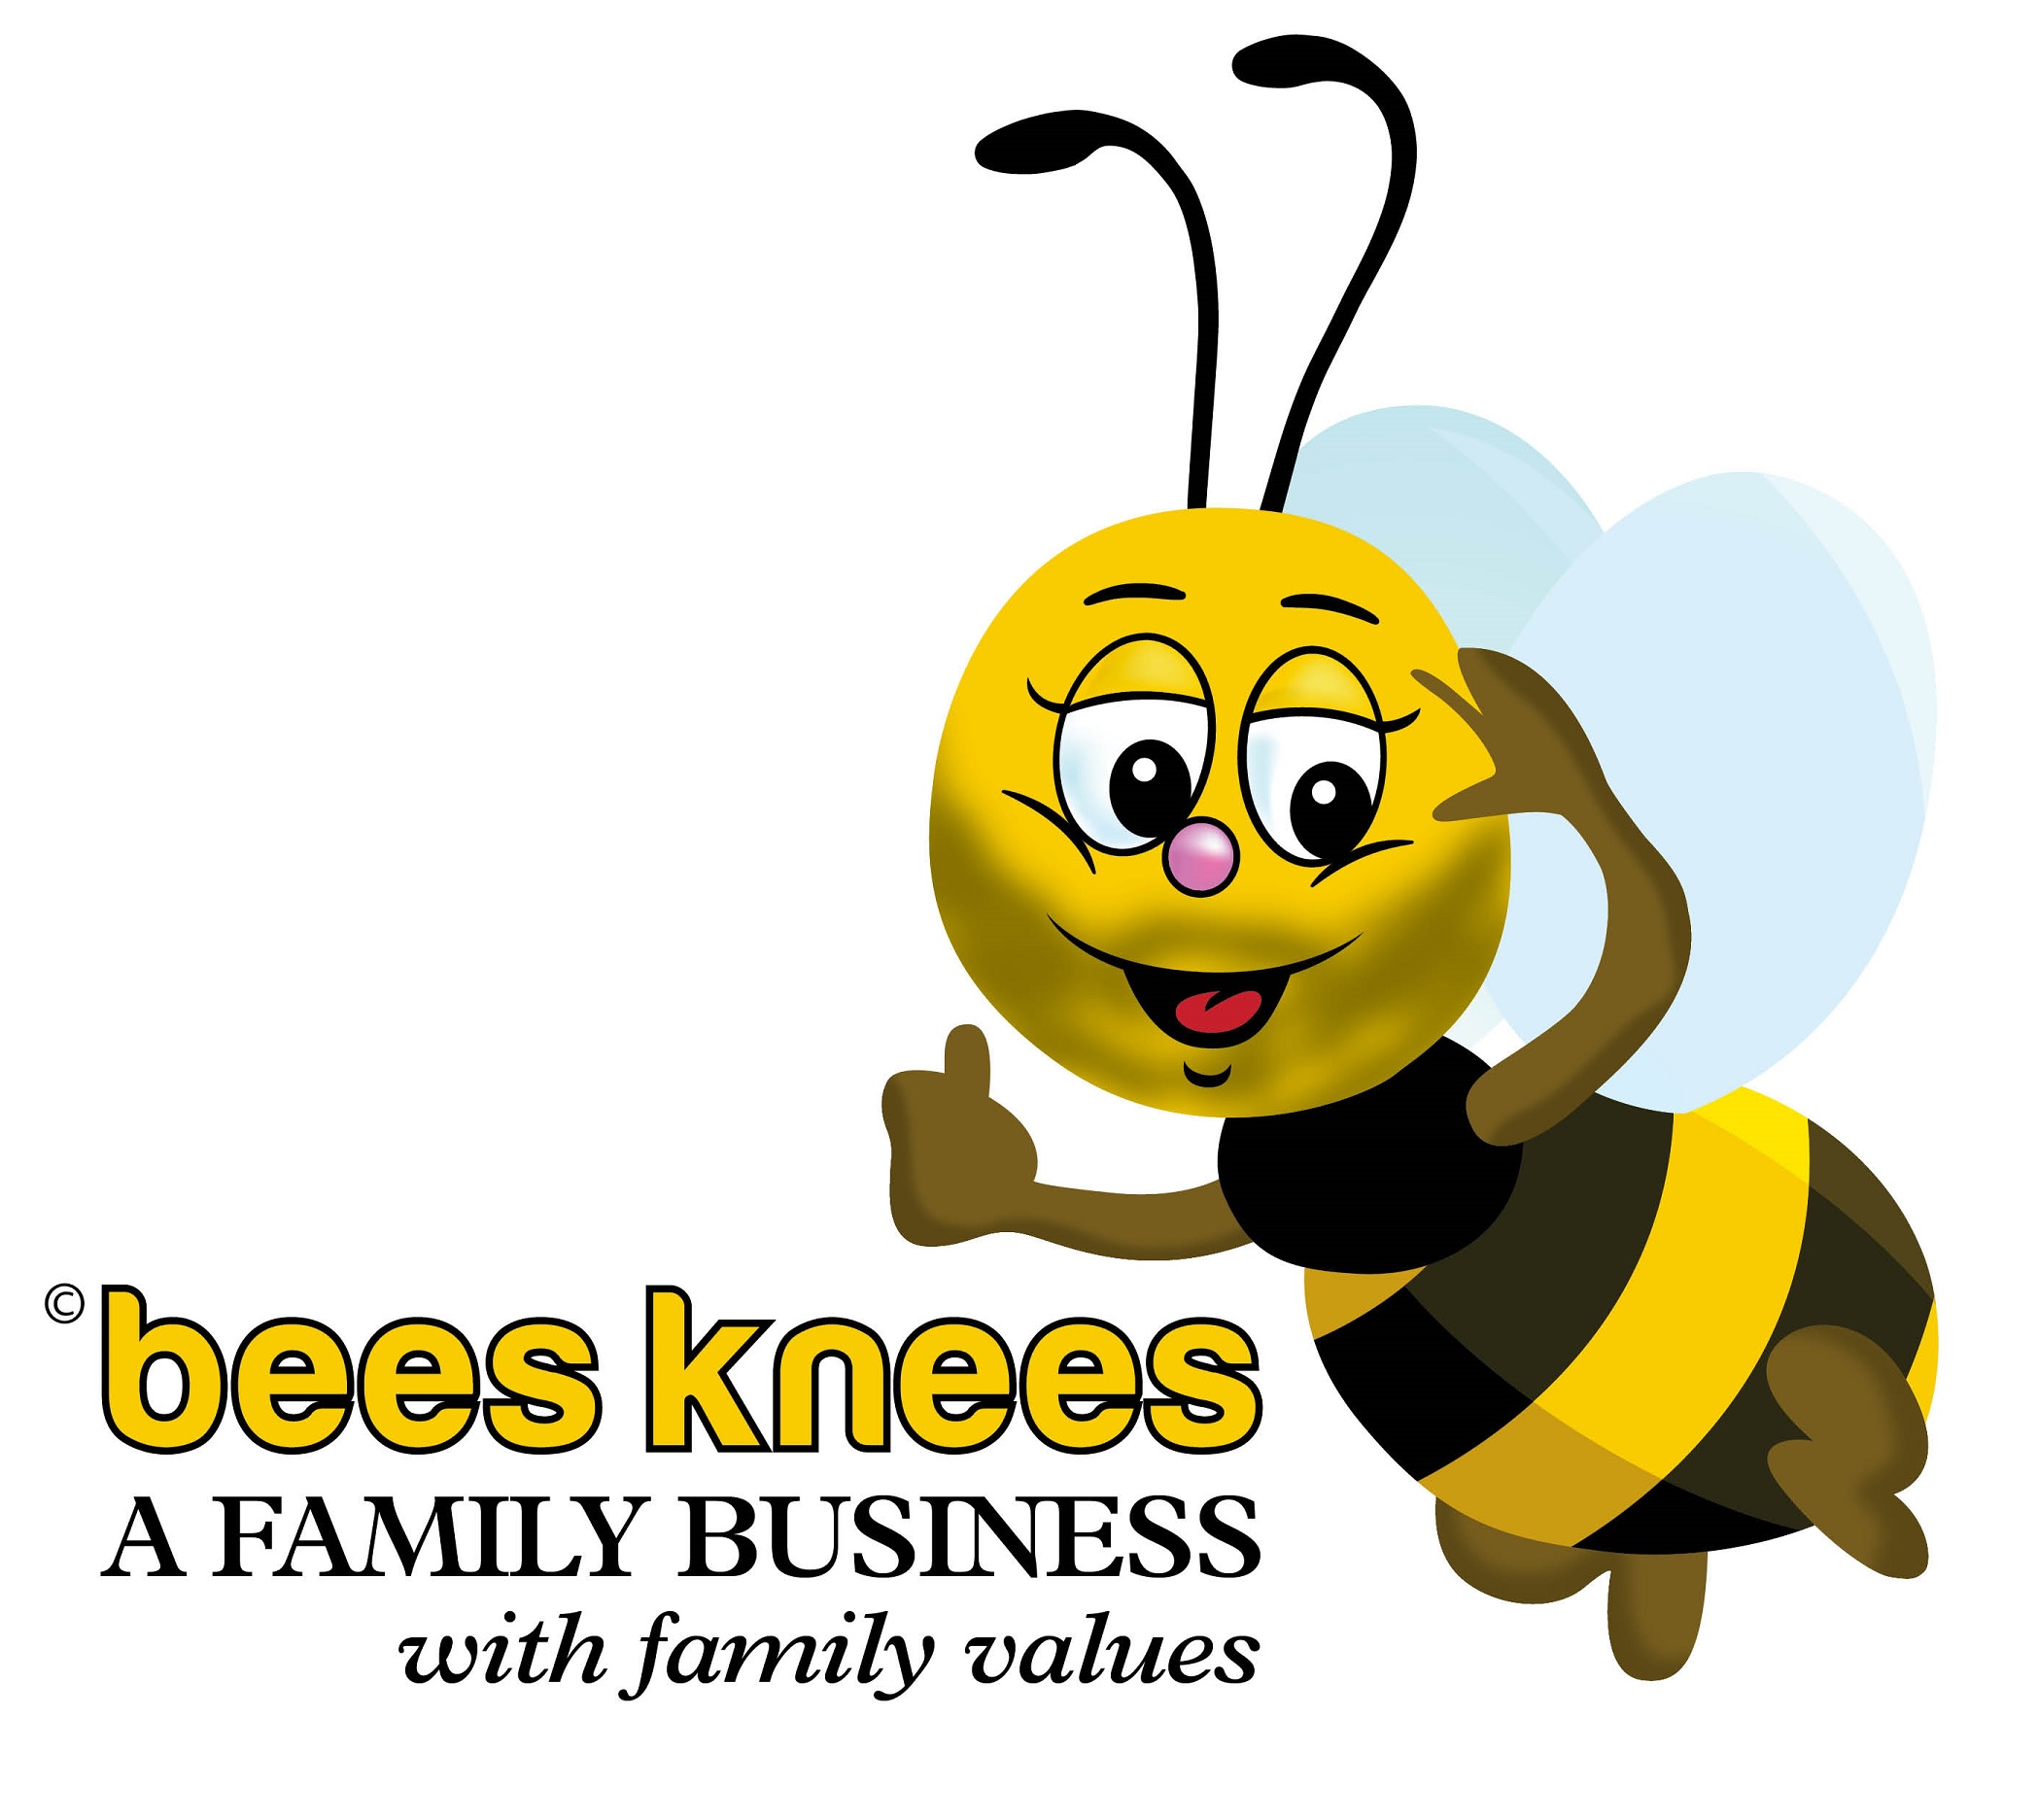 Metal and Stone Ltd t/a BeesKnees Pest & Property Services